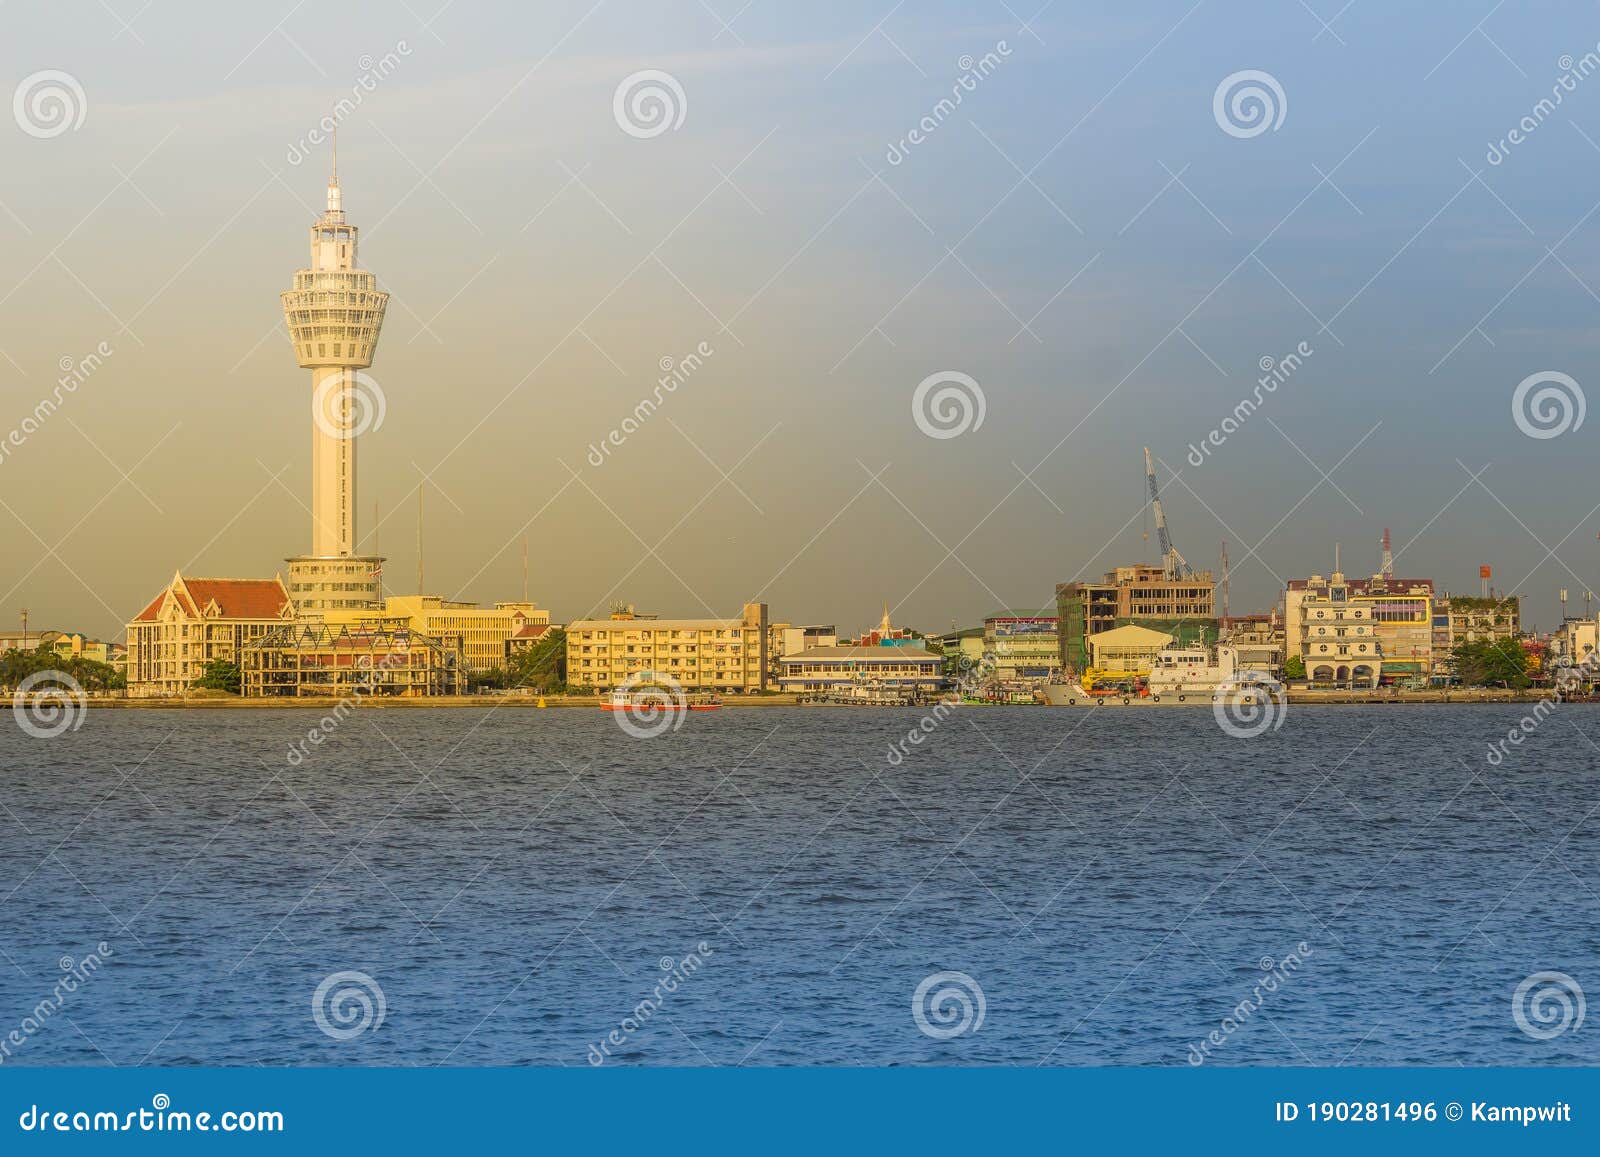 Riverfront View Of Samut Prakan City Hall With New Observation Tower And Boat Pier Samut Prakan Is At The Mouth Of The Chao Stock Photo Image Of Monument Capital